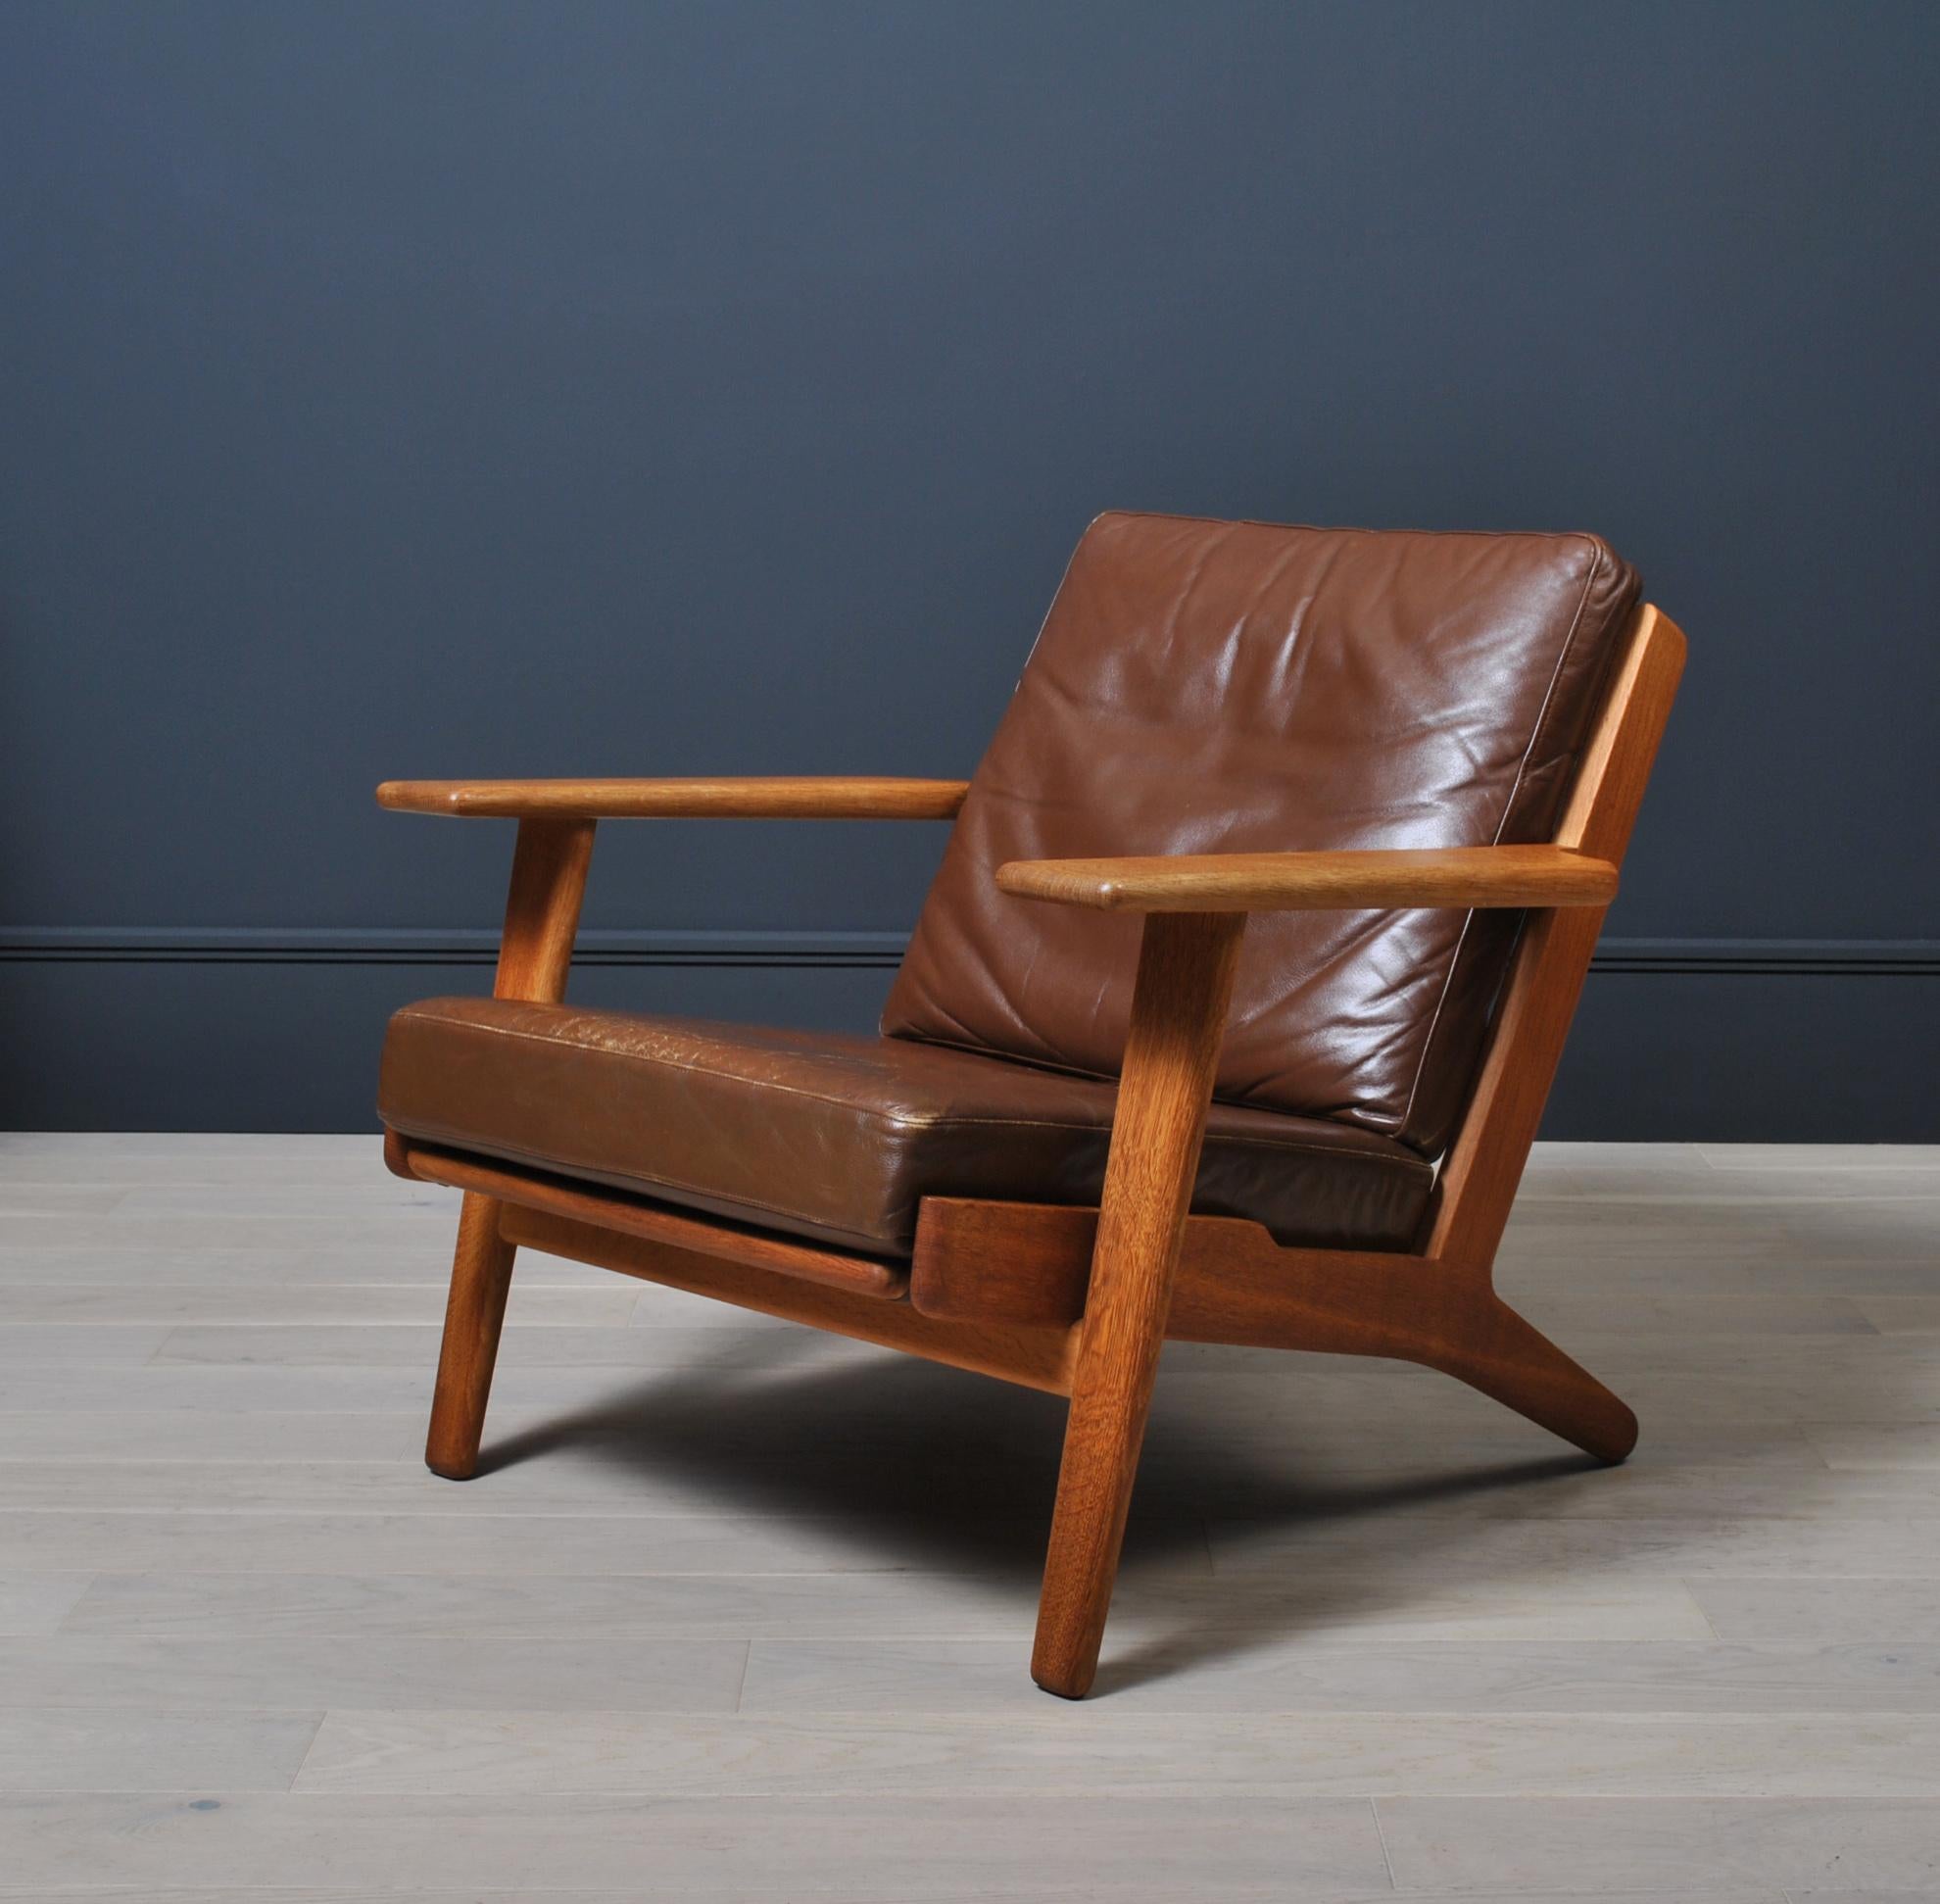 Original 1950s Hans J Wegner GE290 lounge chair in oak. Original soft brown leather - aged and patinated. Produced by GETAMA, Denmark. Other custom reupholstery is available in fabric or leather. Enquire for upholstery details and pricing. 
Original